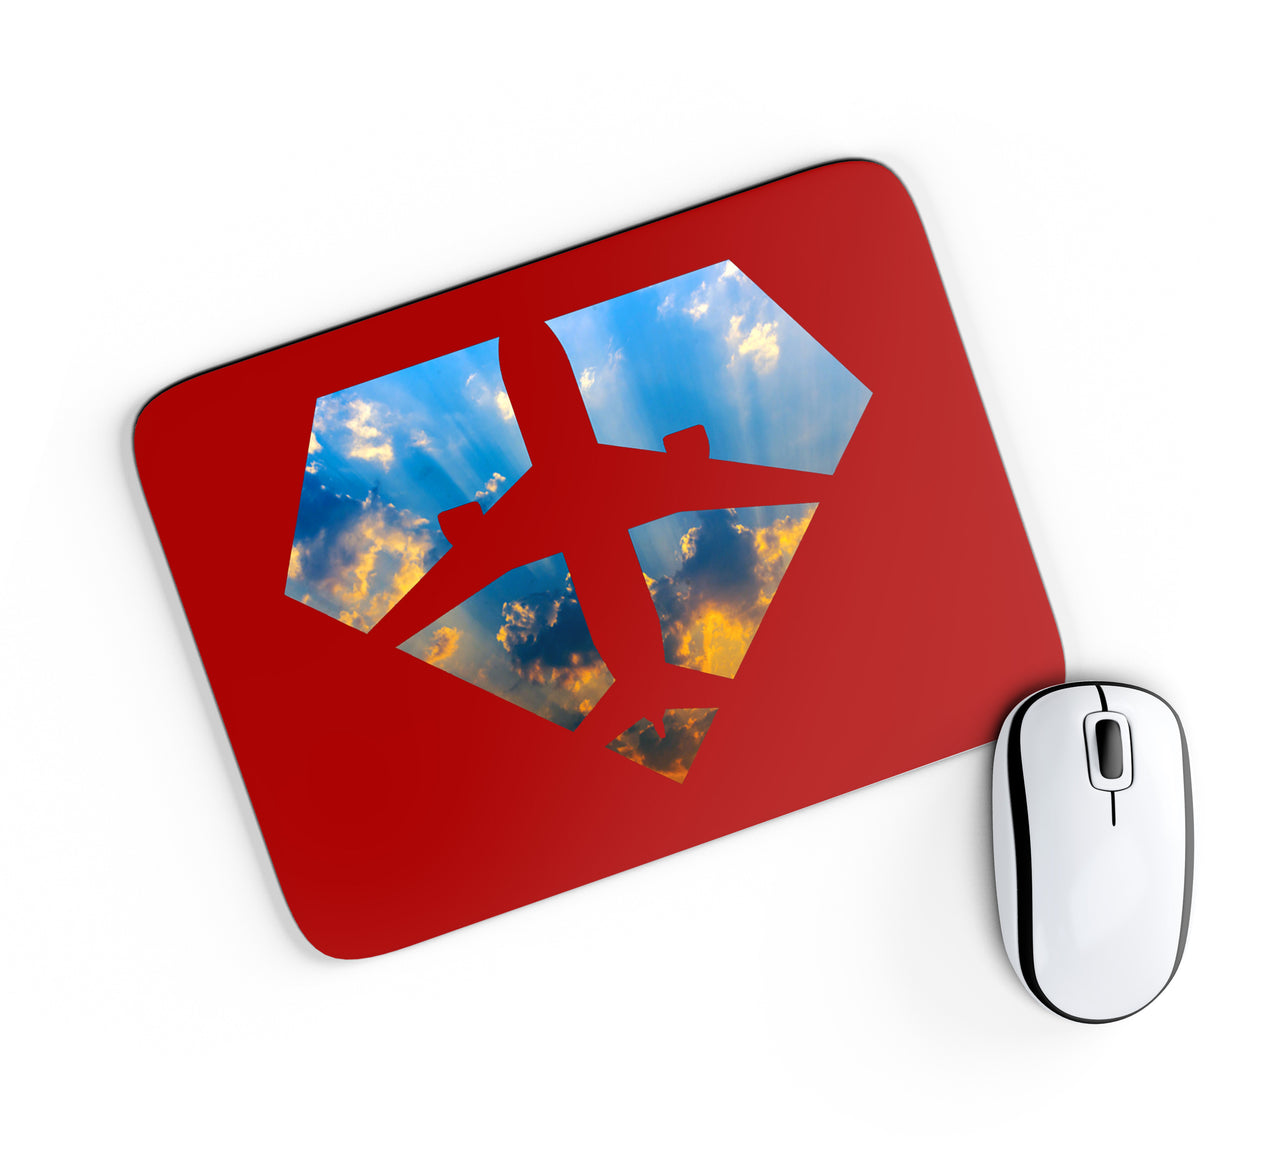 Supermen of The Skies (Sunrise) Designed Mouse Pads